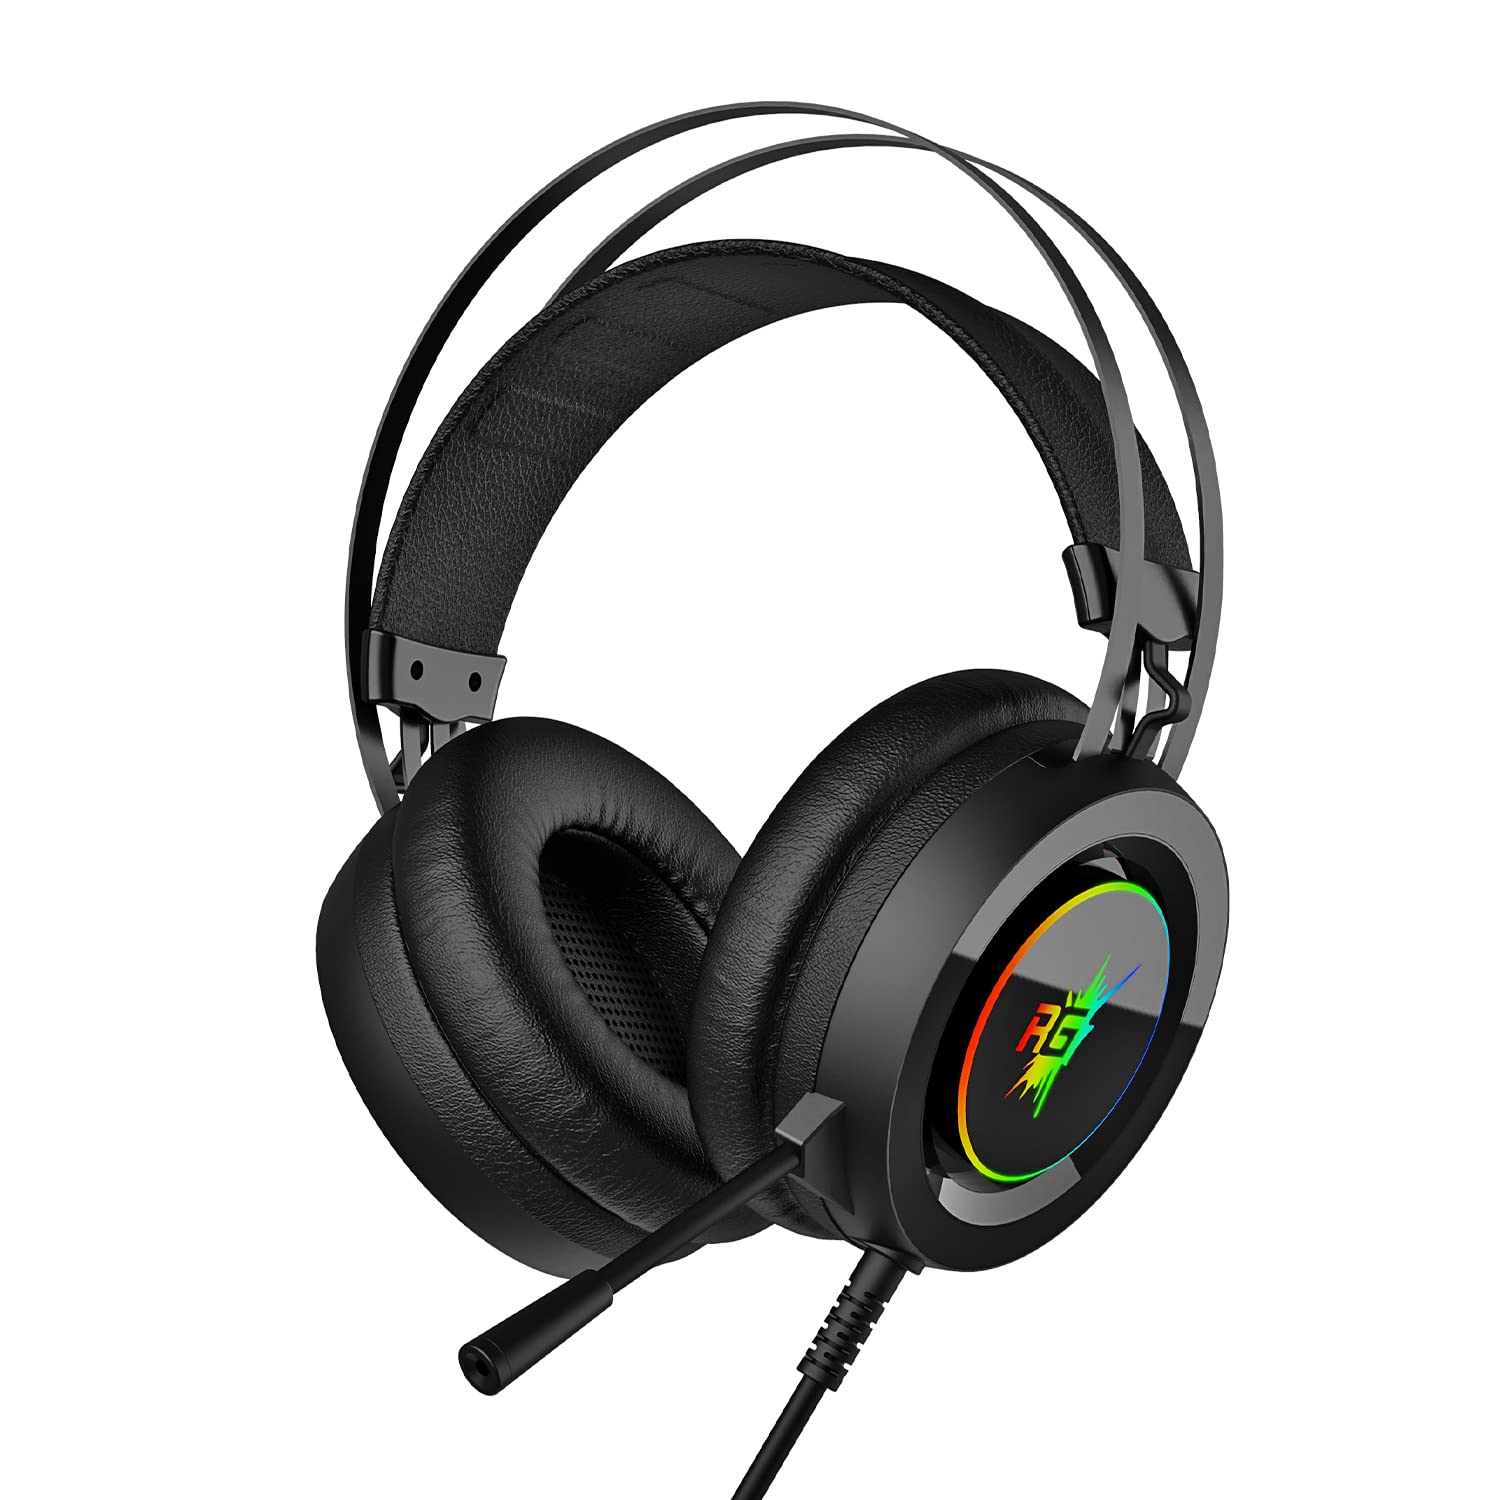 Redgear Cloak Wired RGB Gaming Headphone, 3.5mm Audio-Mic Connectors